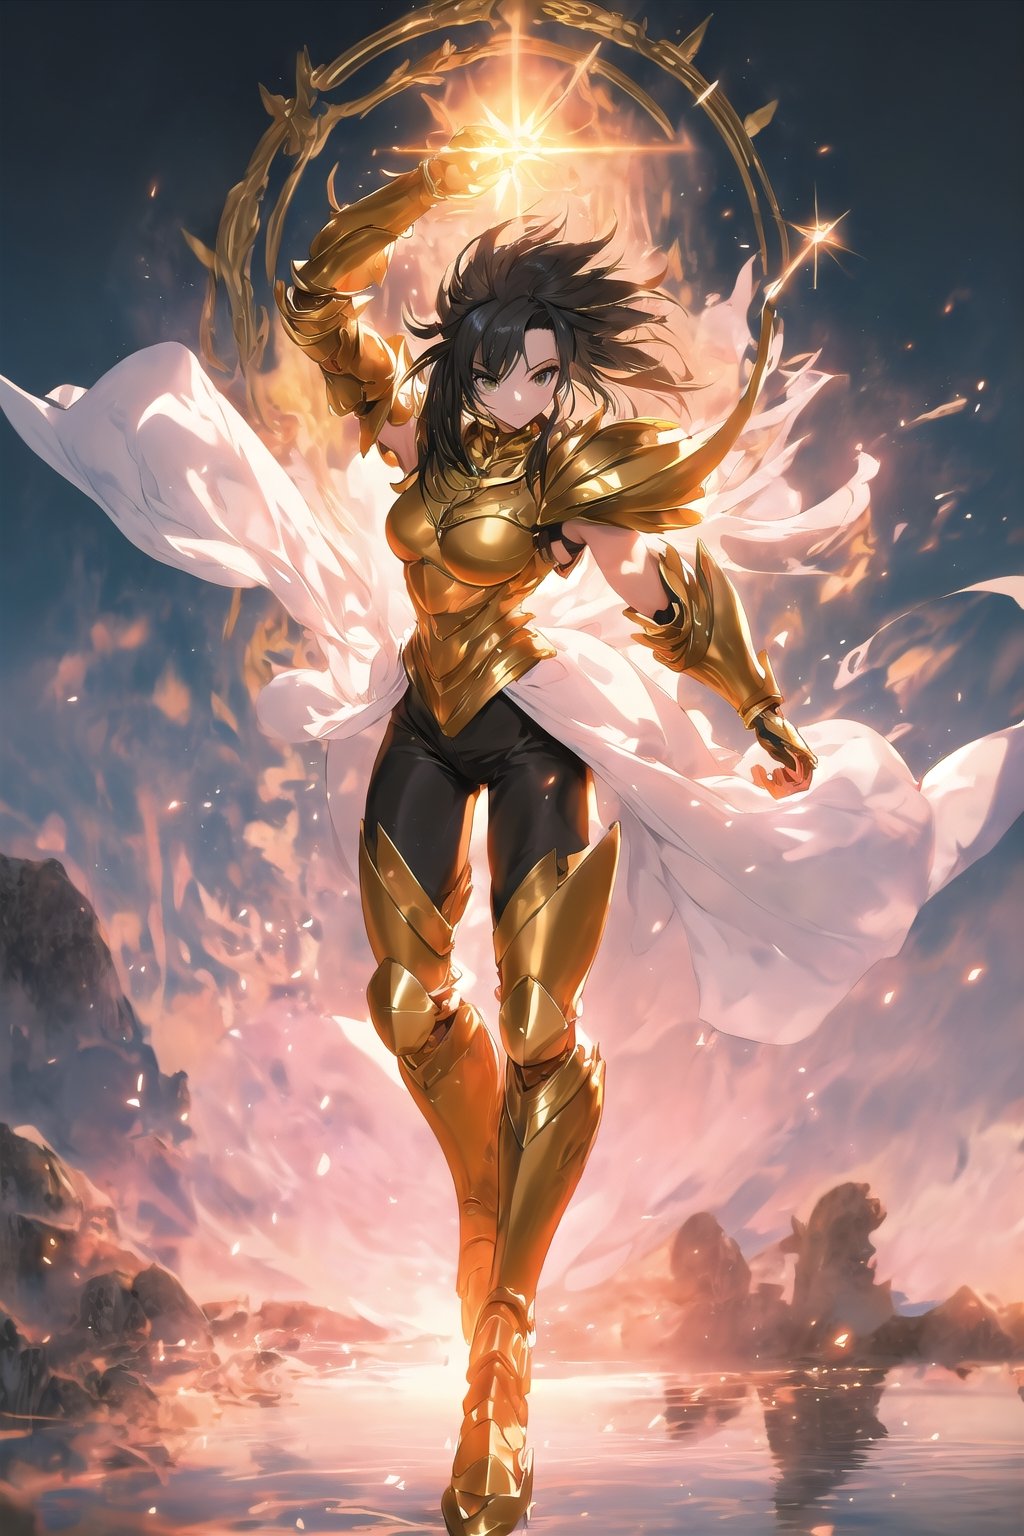 absurdres, highres, ultra detailed,Insane detail in face, (girl:1.3), Gold Saint, Saint Seiya Style, Gold Armor, Full body armor, no helmet, Zodiac Knights, black hair, fighting pose,Pokemon Gotcha Style, gold gloves, long hair, white long cape, messy_hair, Gold eyes, black pants under armor, full body armor, beautiful old greek temple in the background, beautiful fields, insane detail full leg armor, god aura, sagittarius armor, Elysium fields, ready for battle,FUJI,midjourney